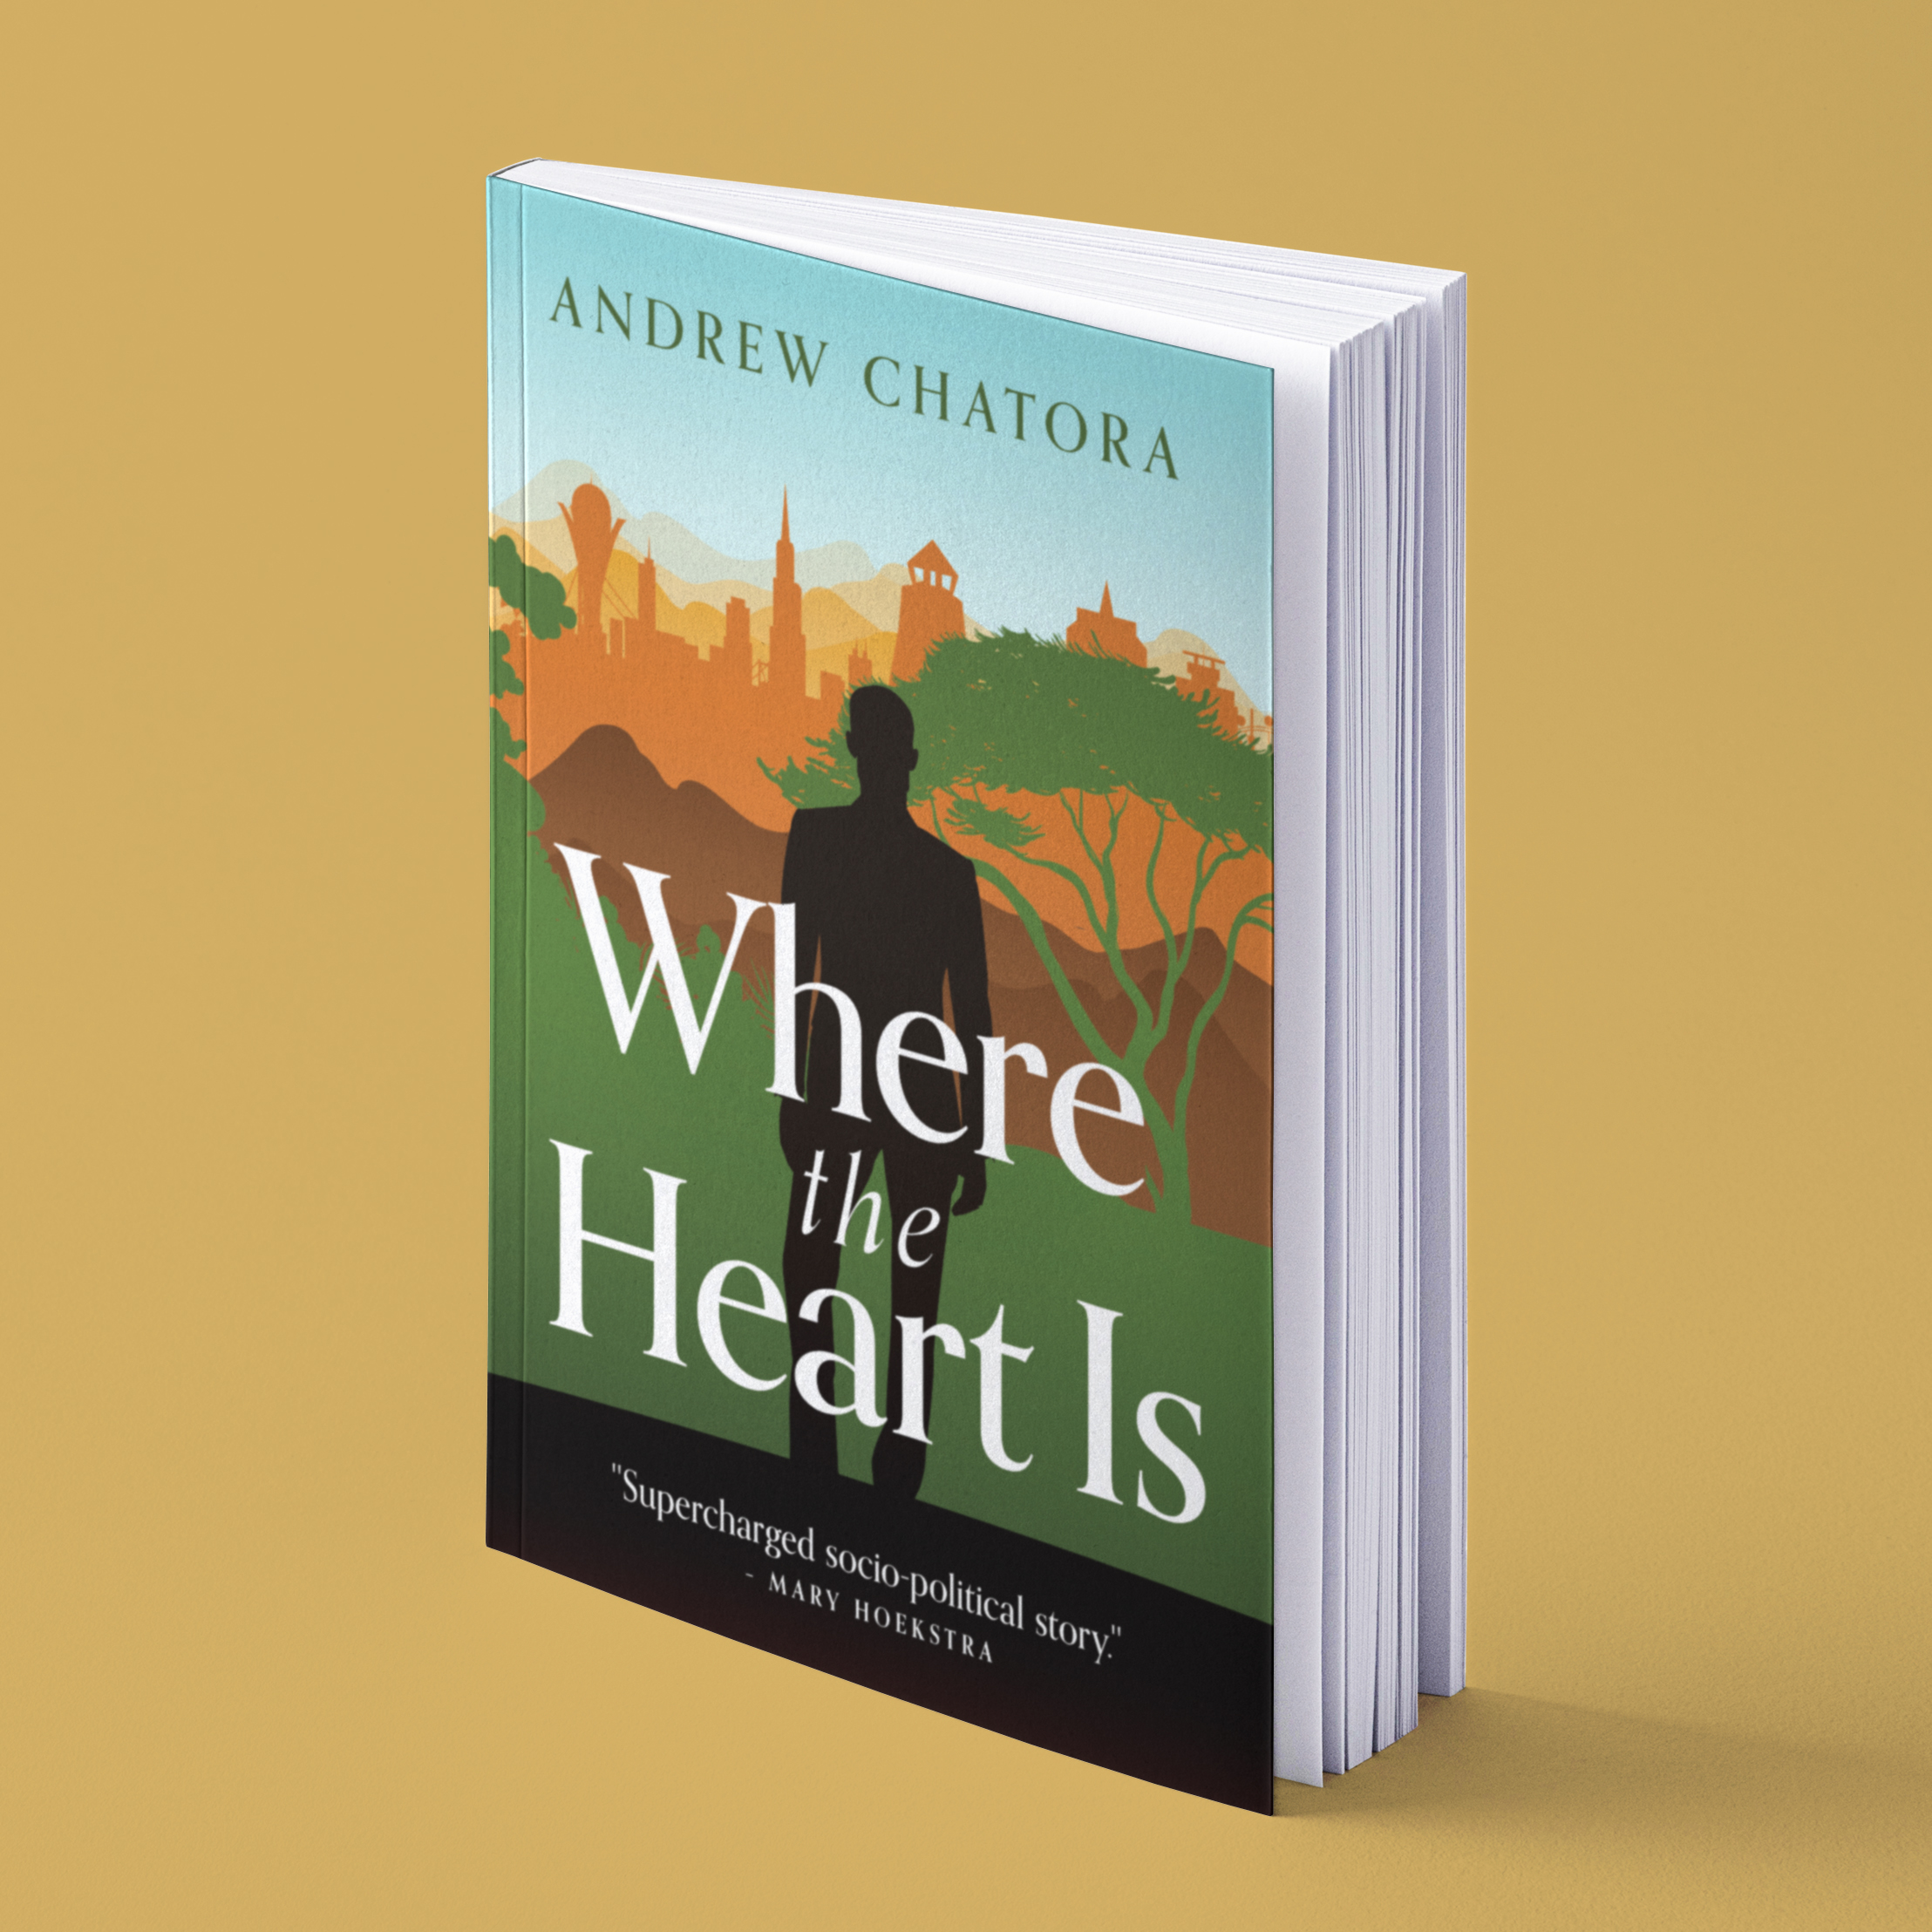 Andrew Chatora shares his immigrant experience in his new book “Where the Heart Is”